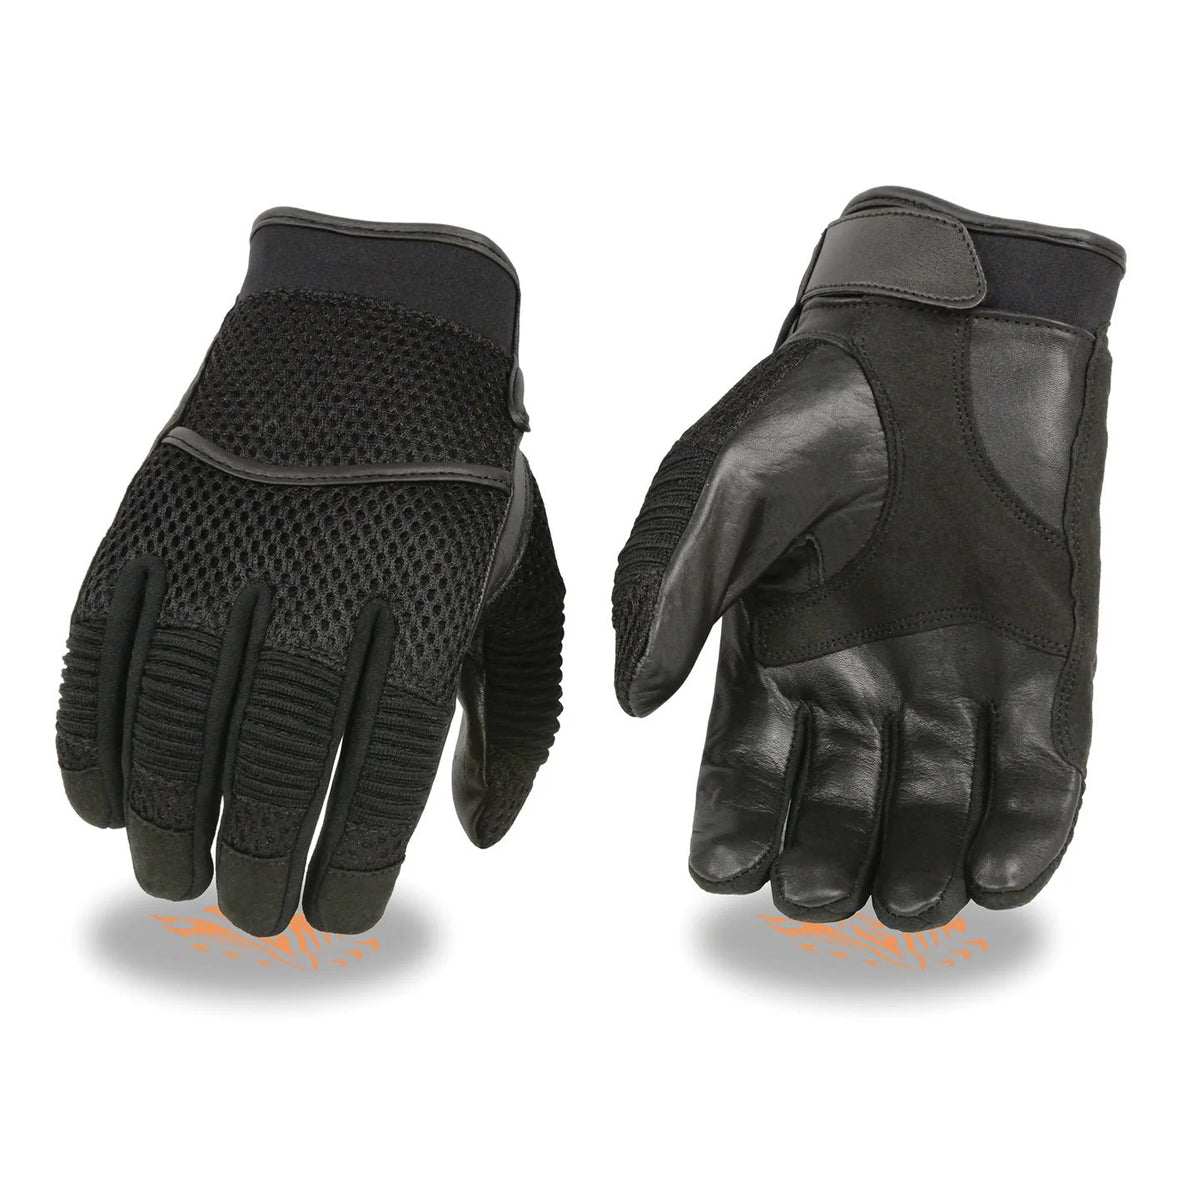 Men's Black Mesh and Leather Racing Gloves with Leather Palm